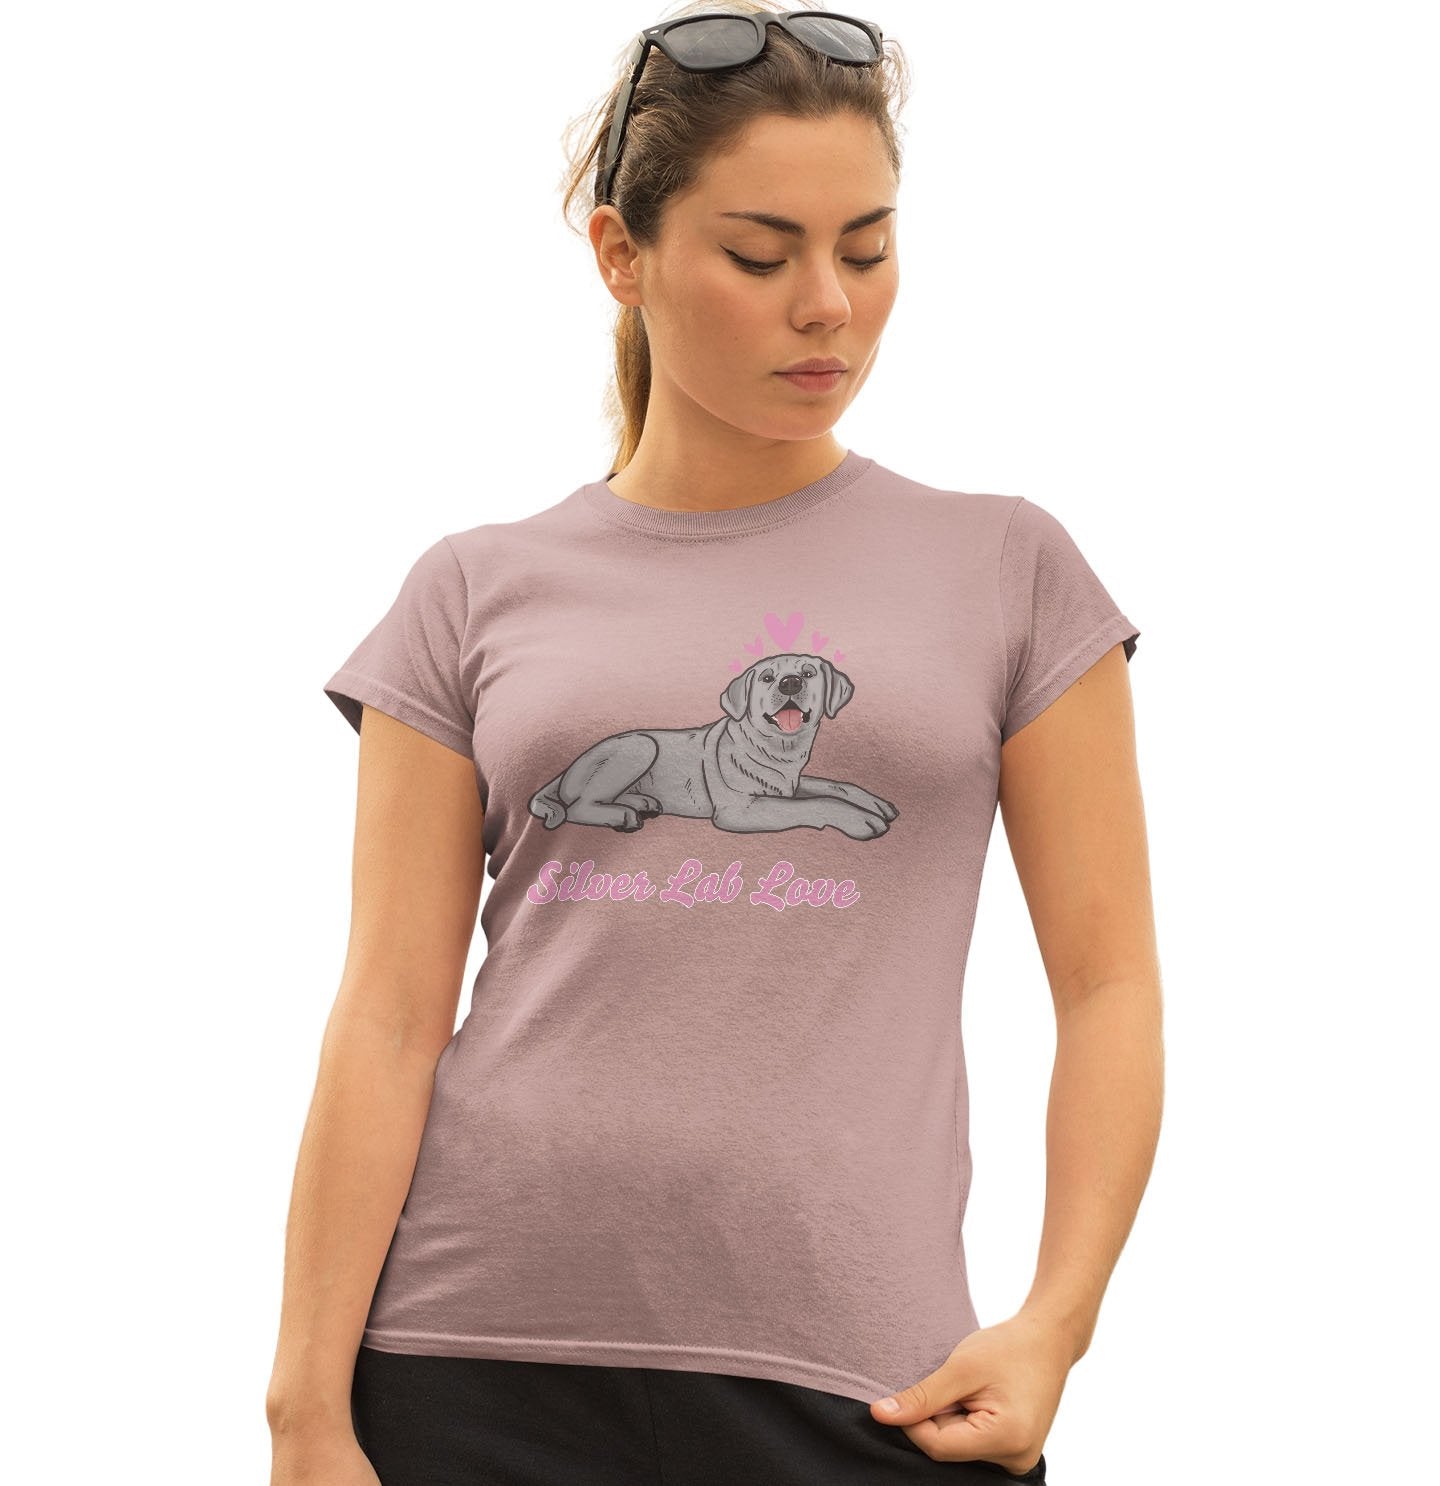 Silver Lab Love - Women's Fitted T-Shirt